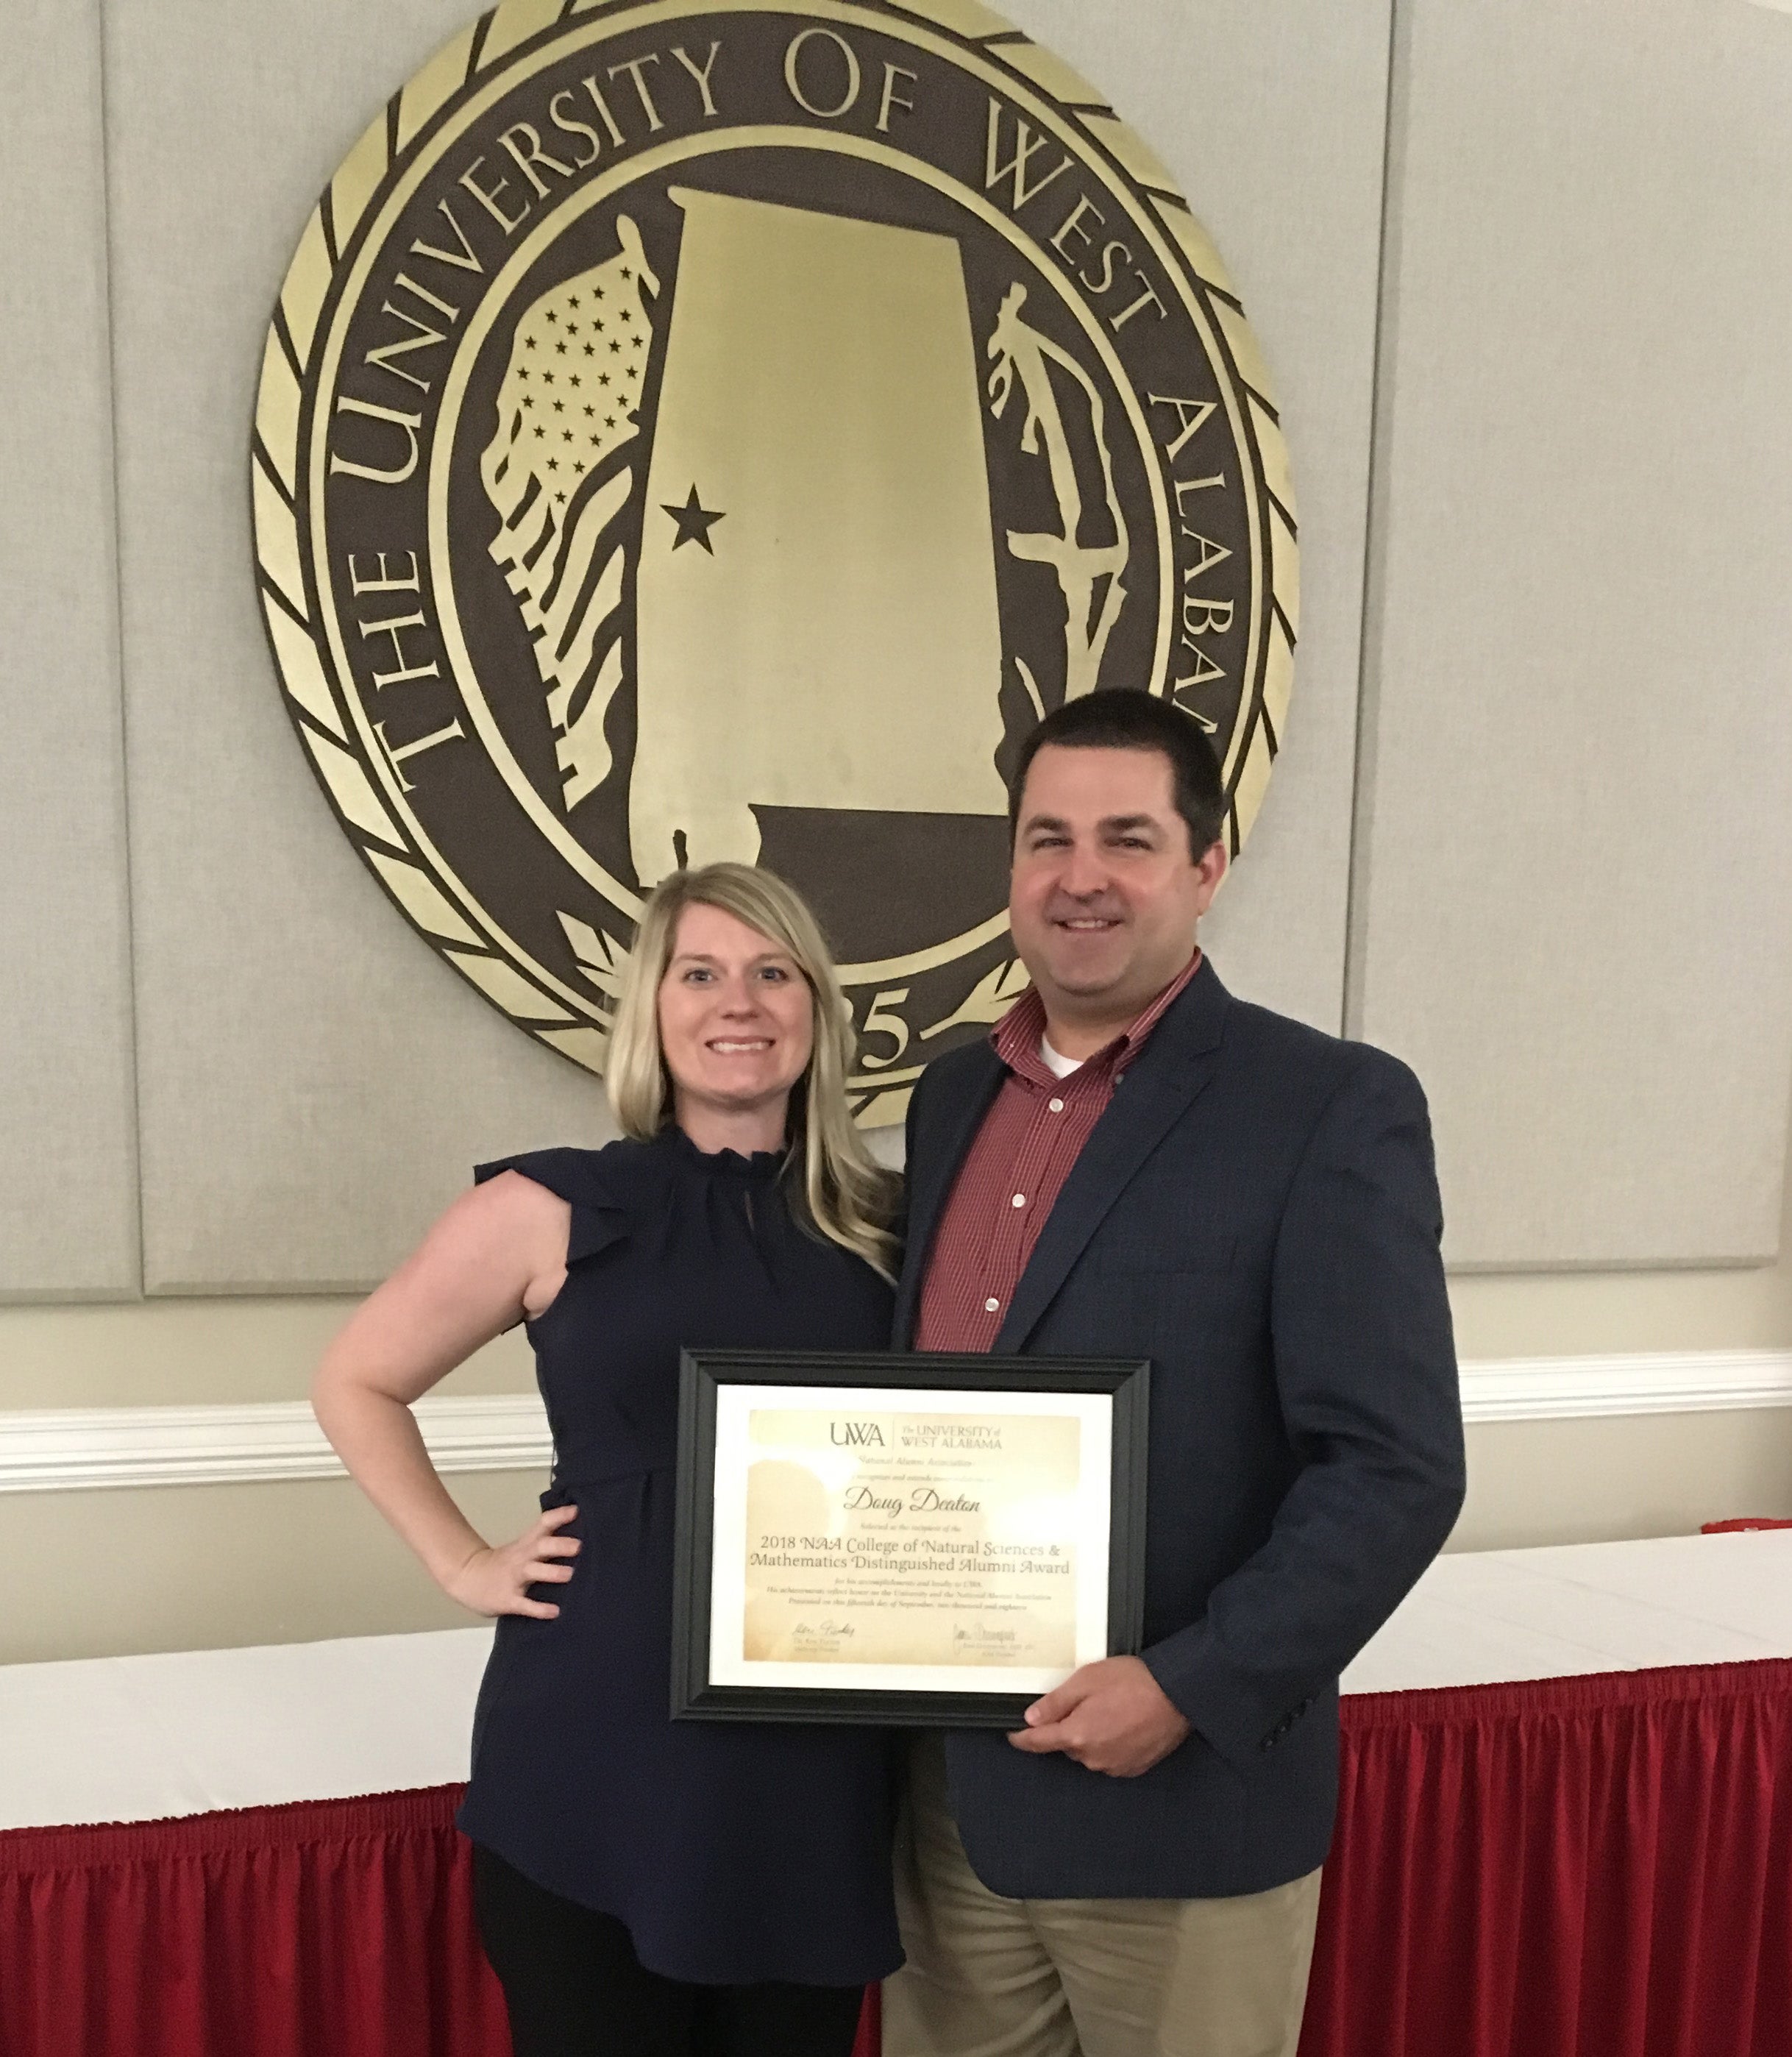 Doug Deaton with his wife Jenna after receiving the 2018 Distinguished Alumni Achievement